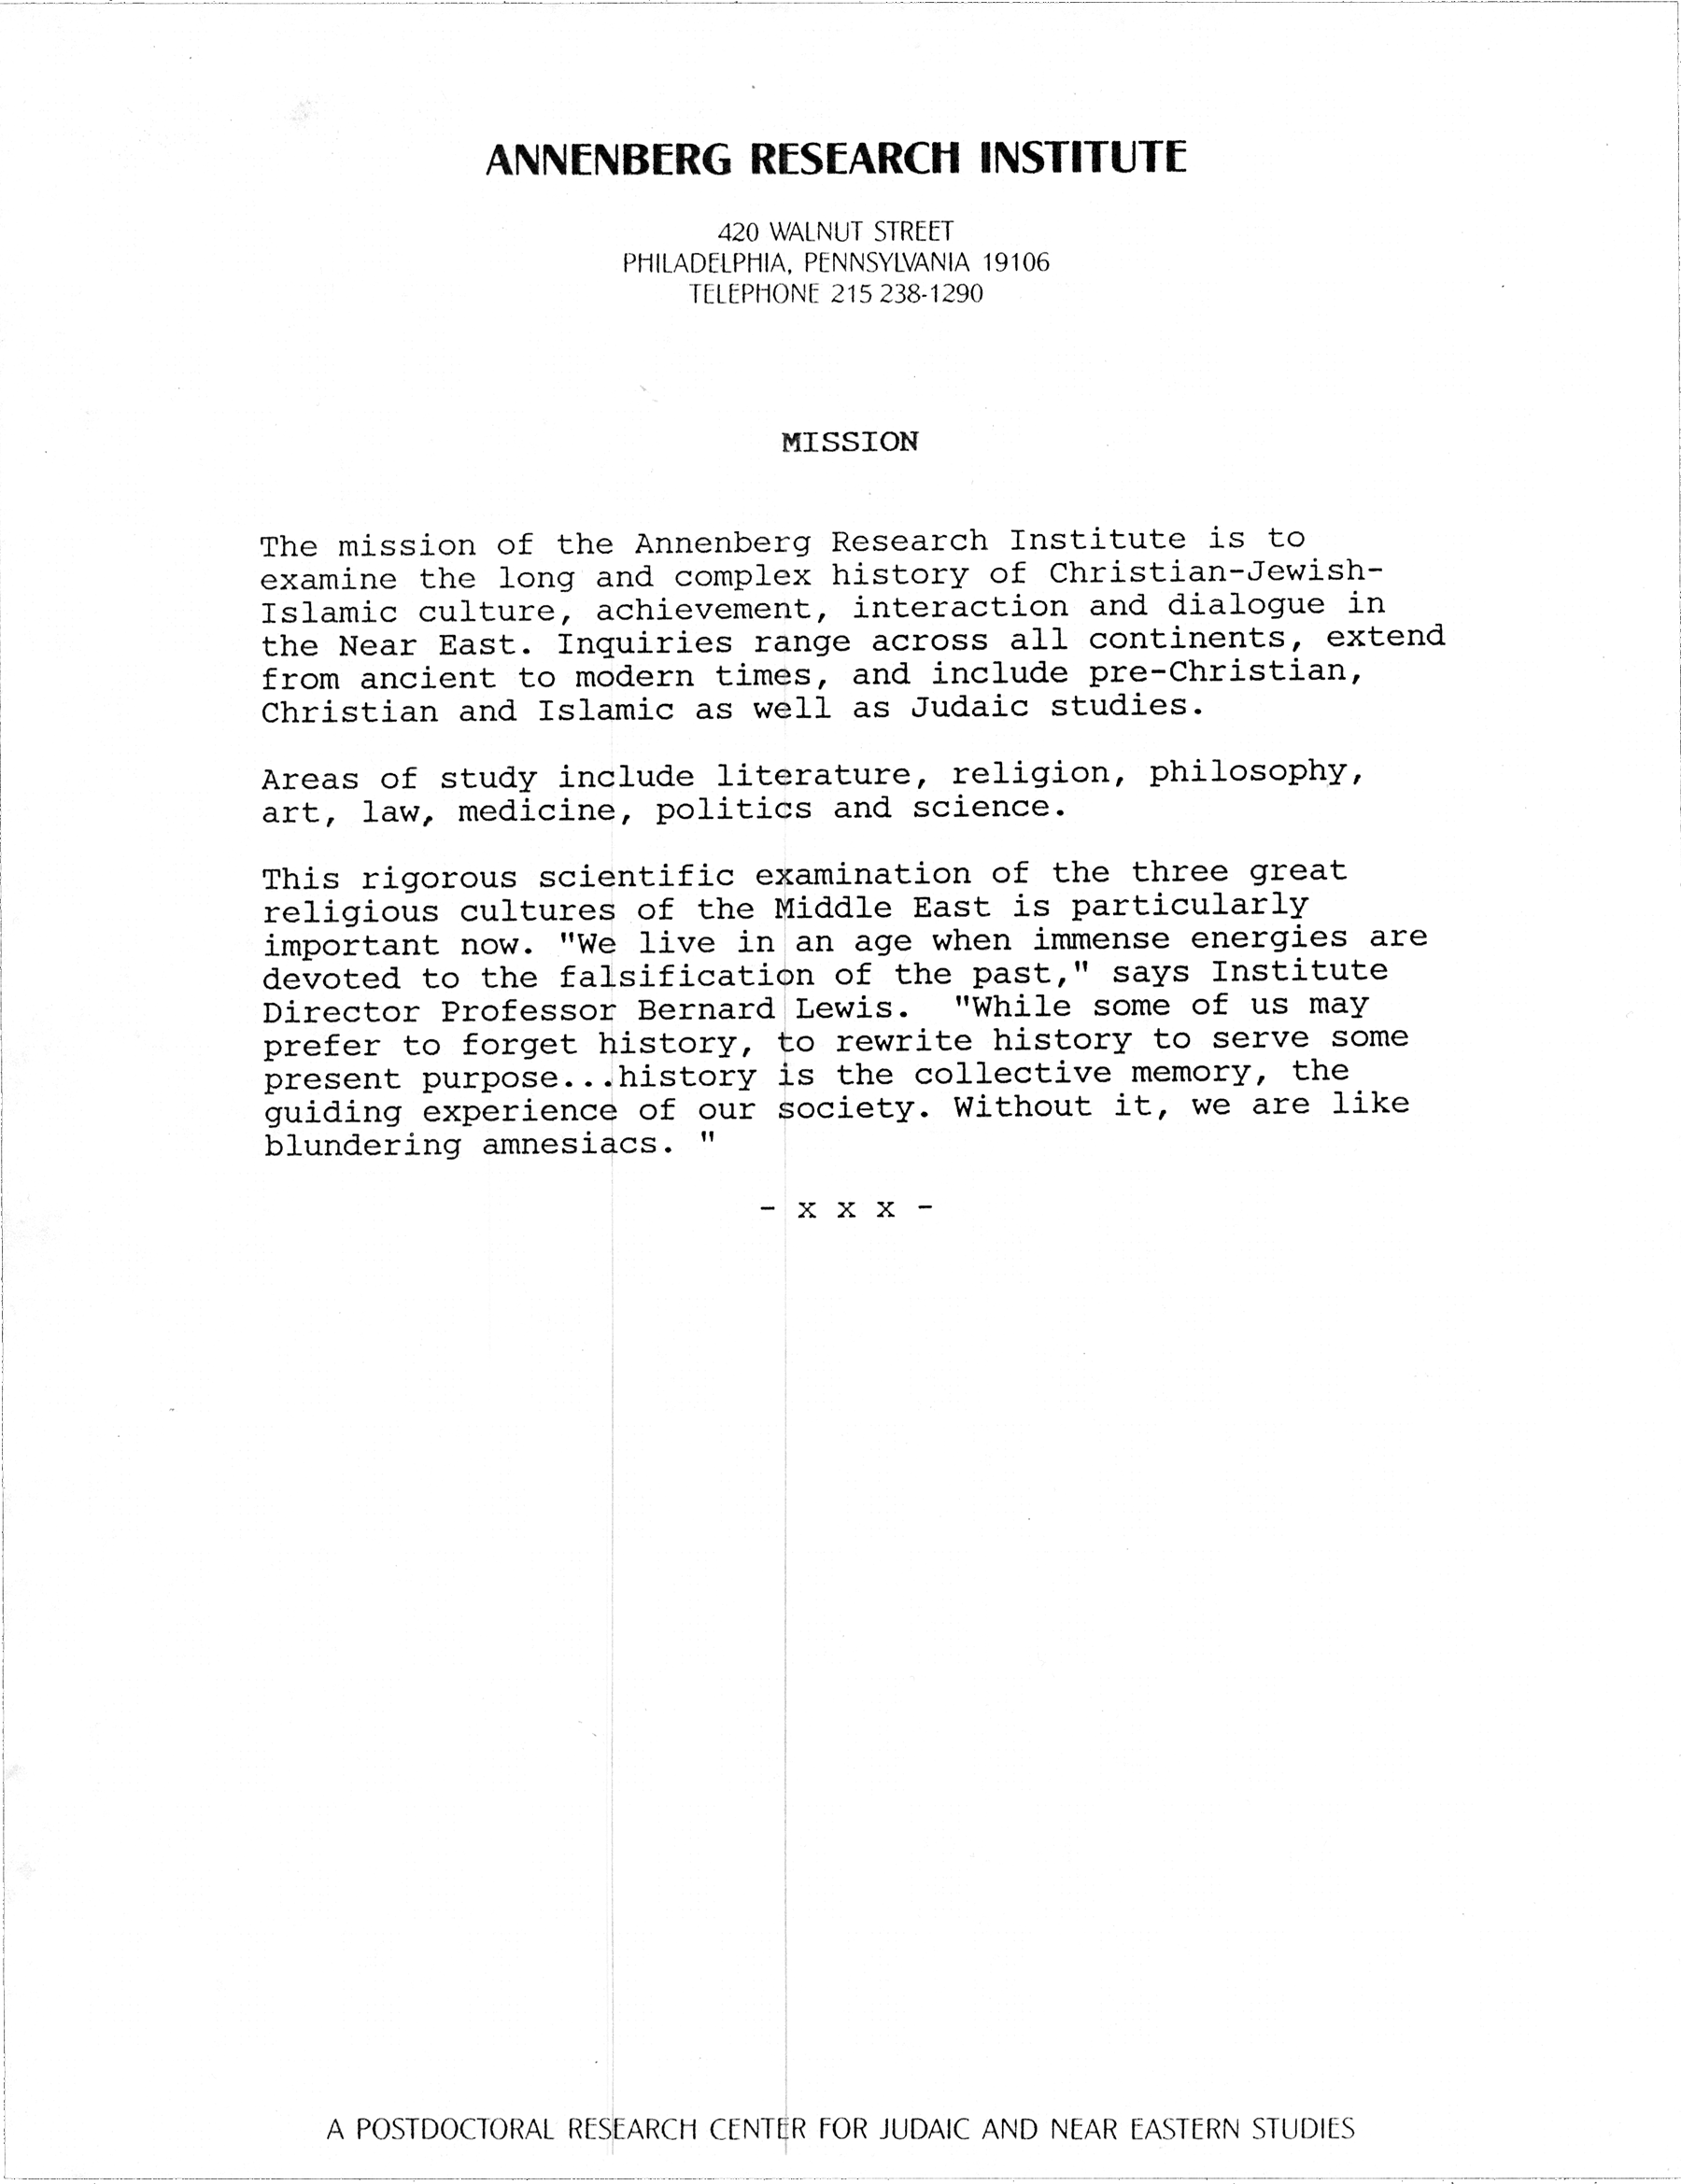 Letterhead: Annenberg Research Institute, A Postdoctoral Research Center for Judaic and Near Eastern Studies, Mission statement 